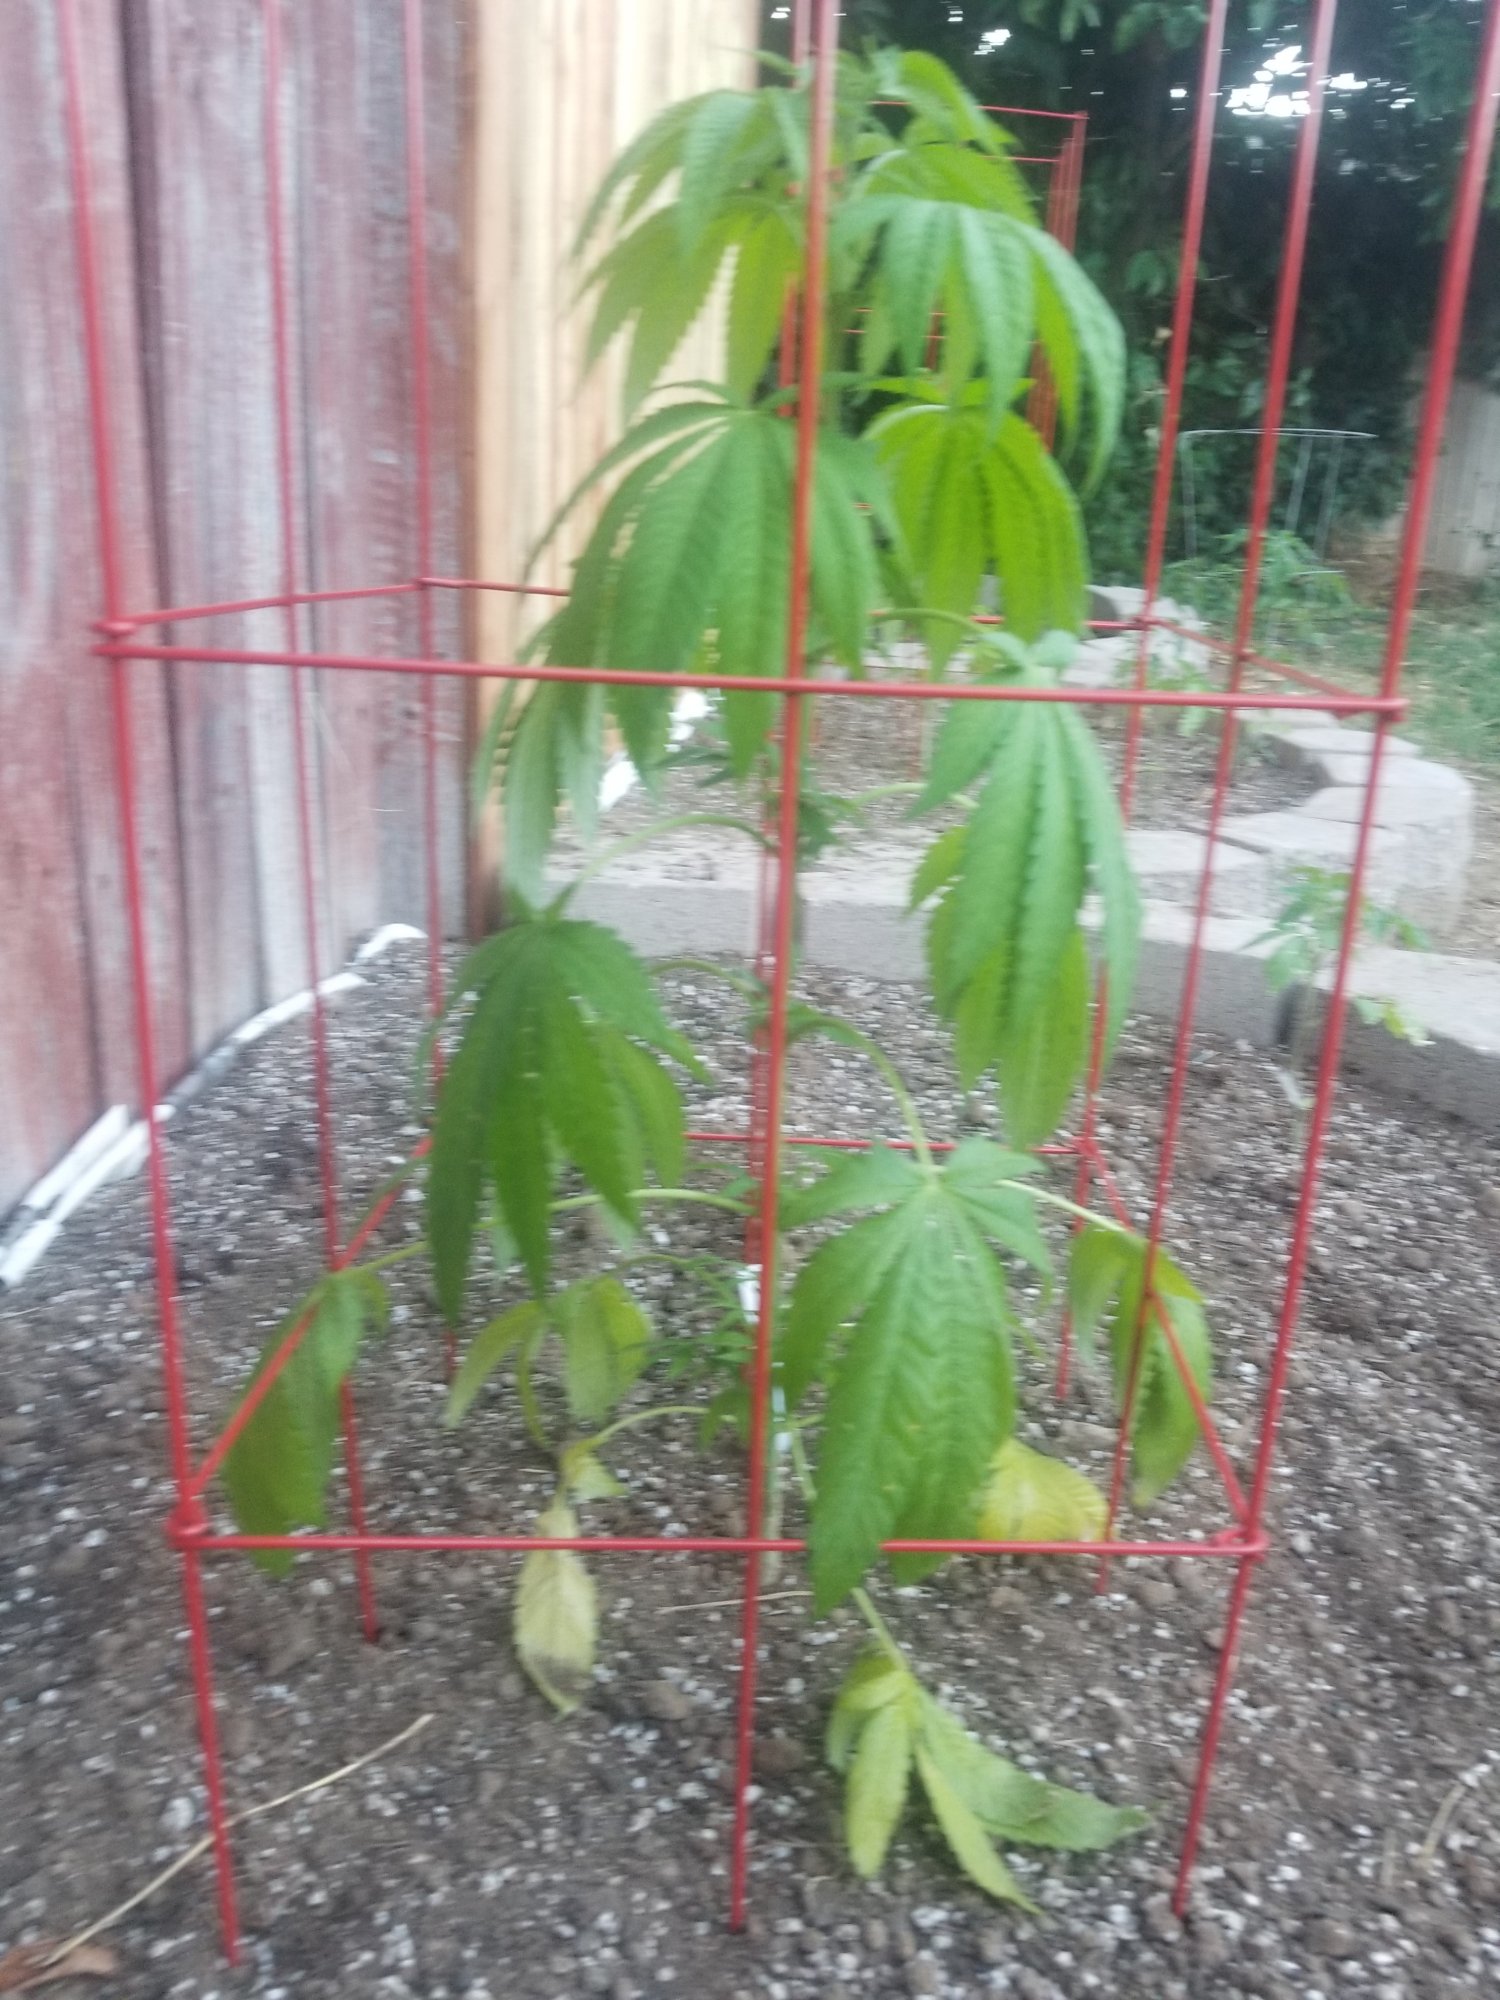 New outside grower